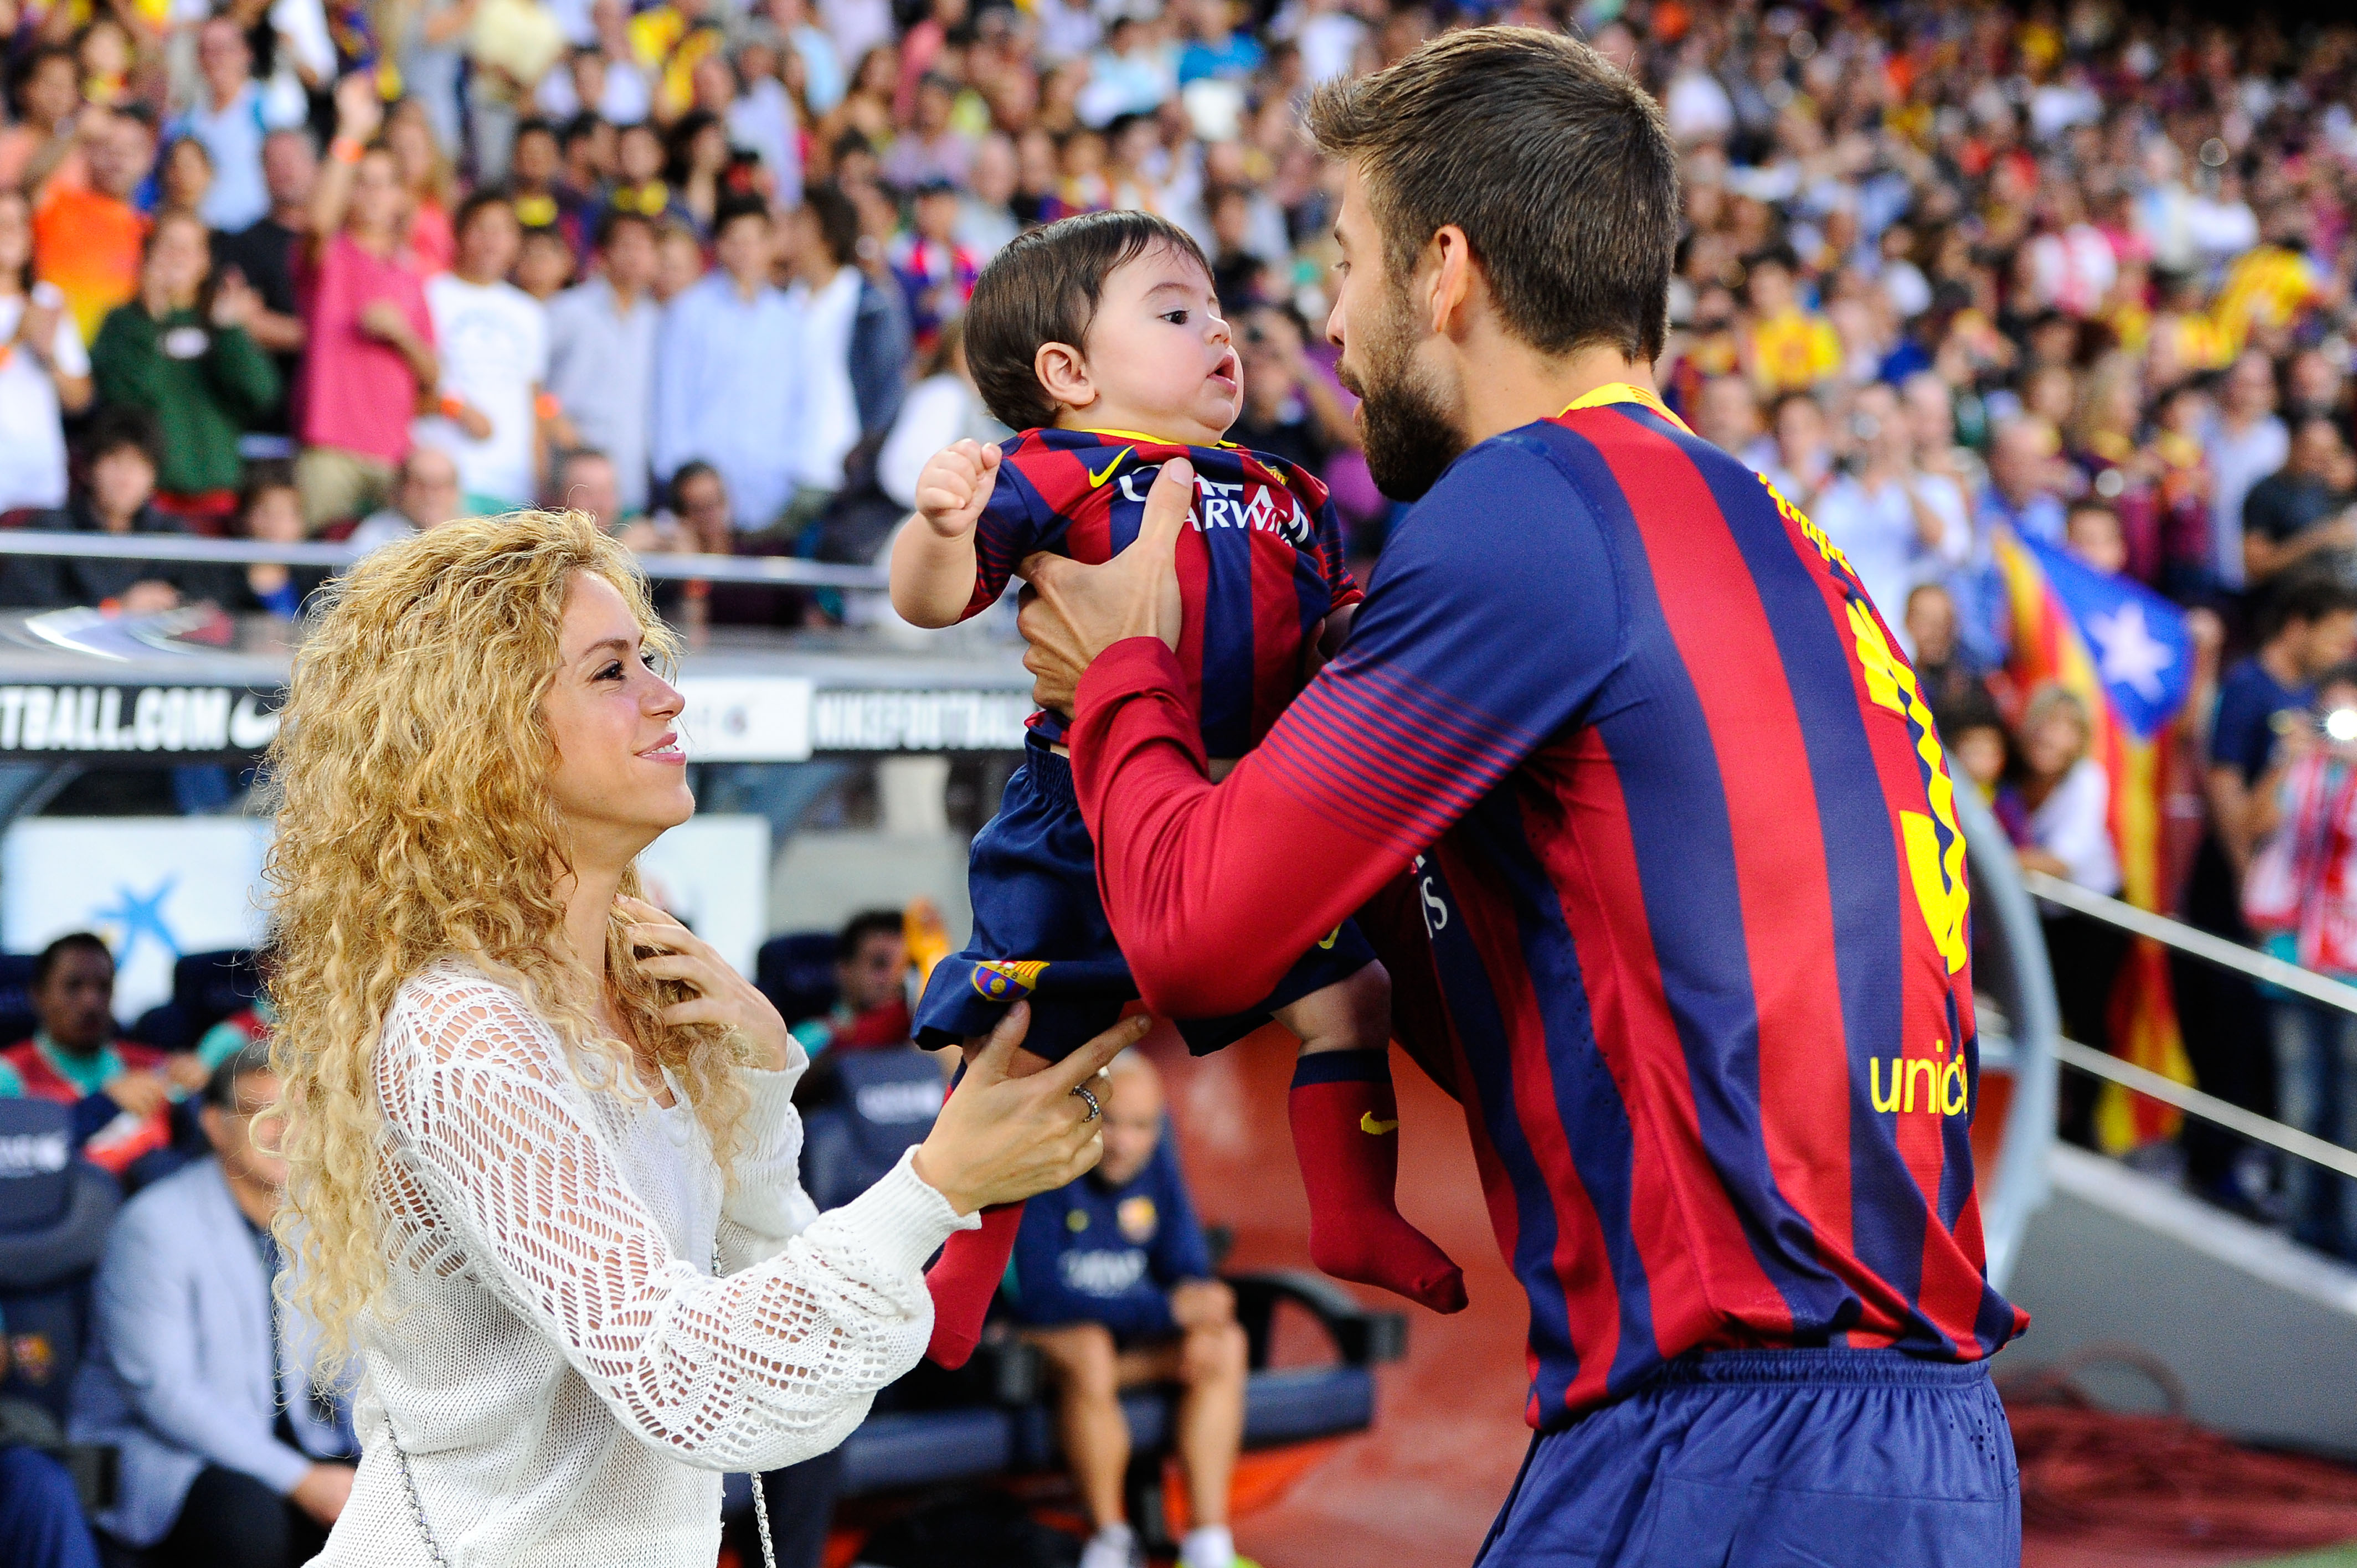 Shakira and Gerard Pique with their son Milan on September 14, 2013 in Barcelona, Spain. | Source: Getty Images